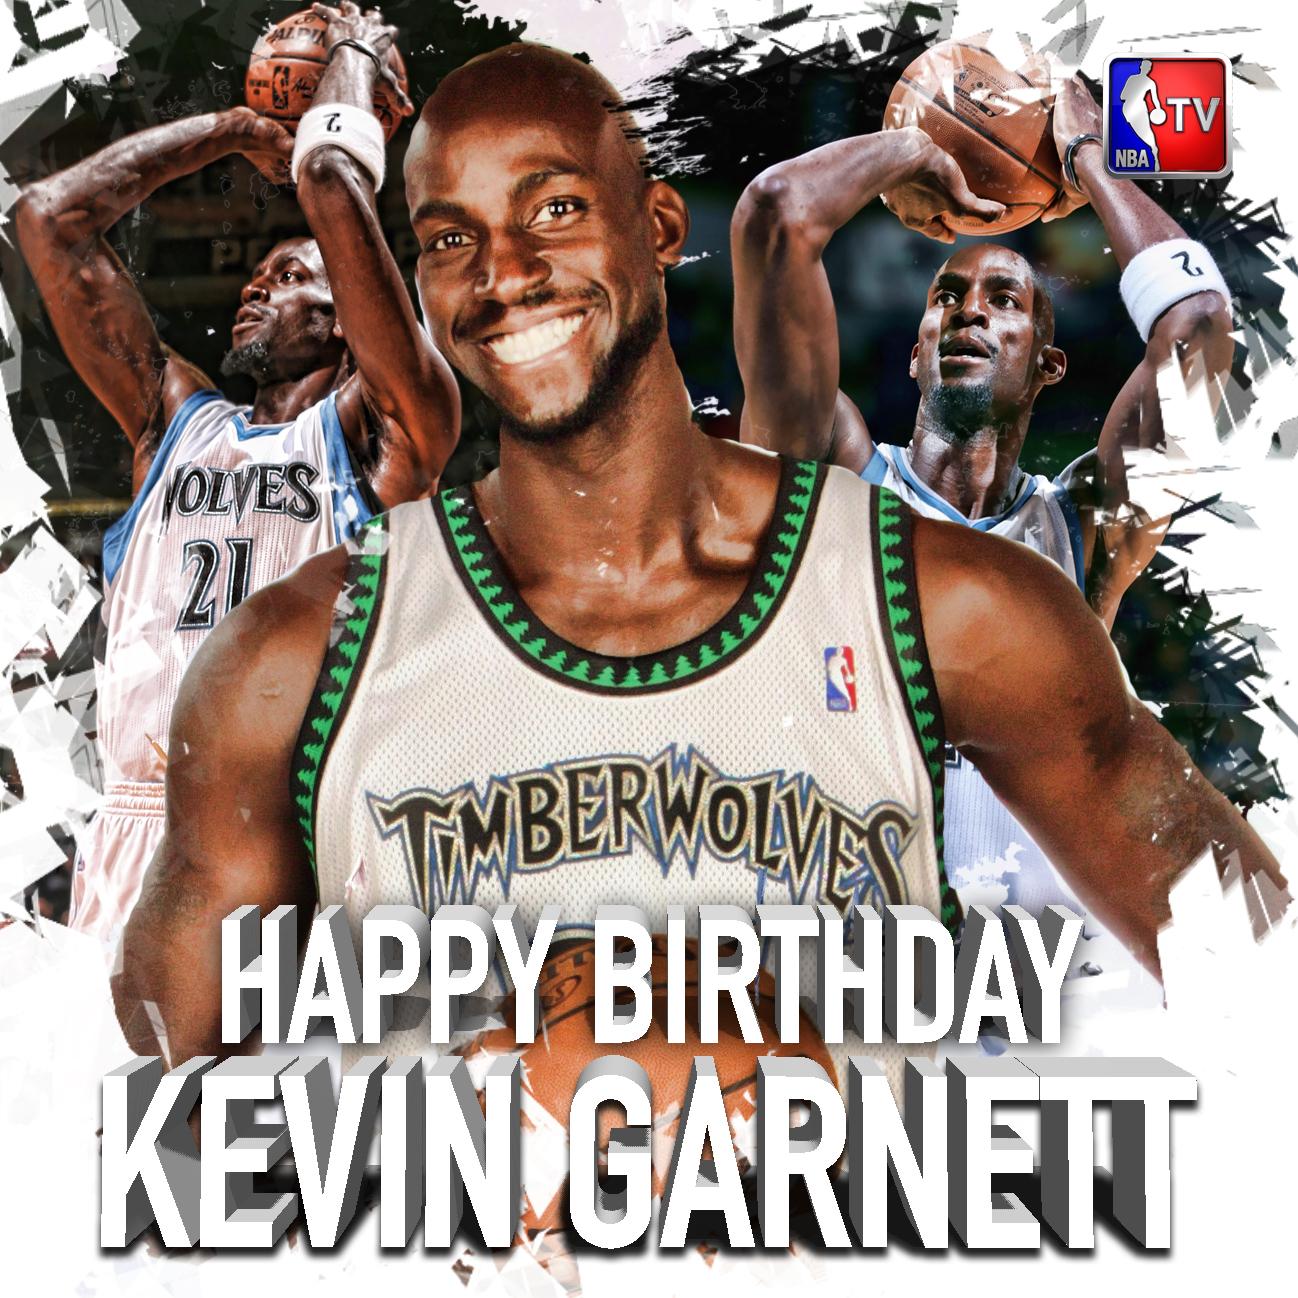 Join us in wishing 15-time All-Star and 2008 champion Kevin Garnett a Happy Birthday! 